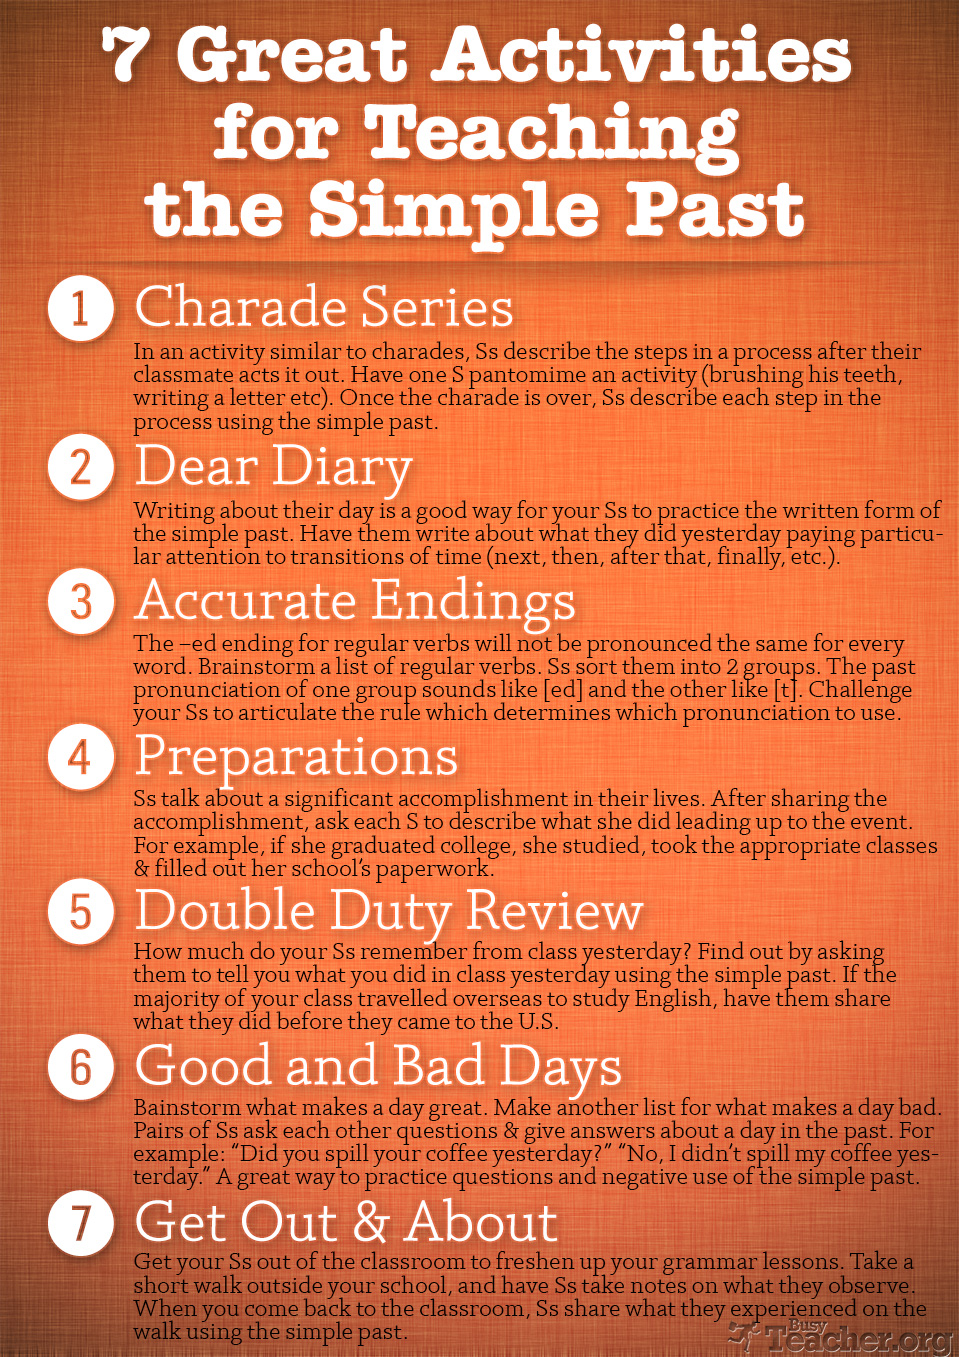 7 Great Activities to Teach the Simple Past: Poster